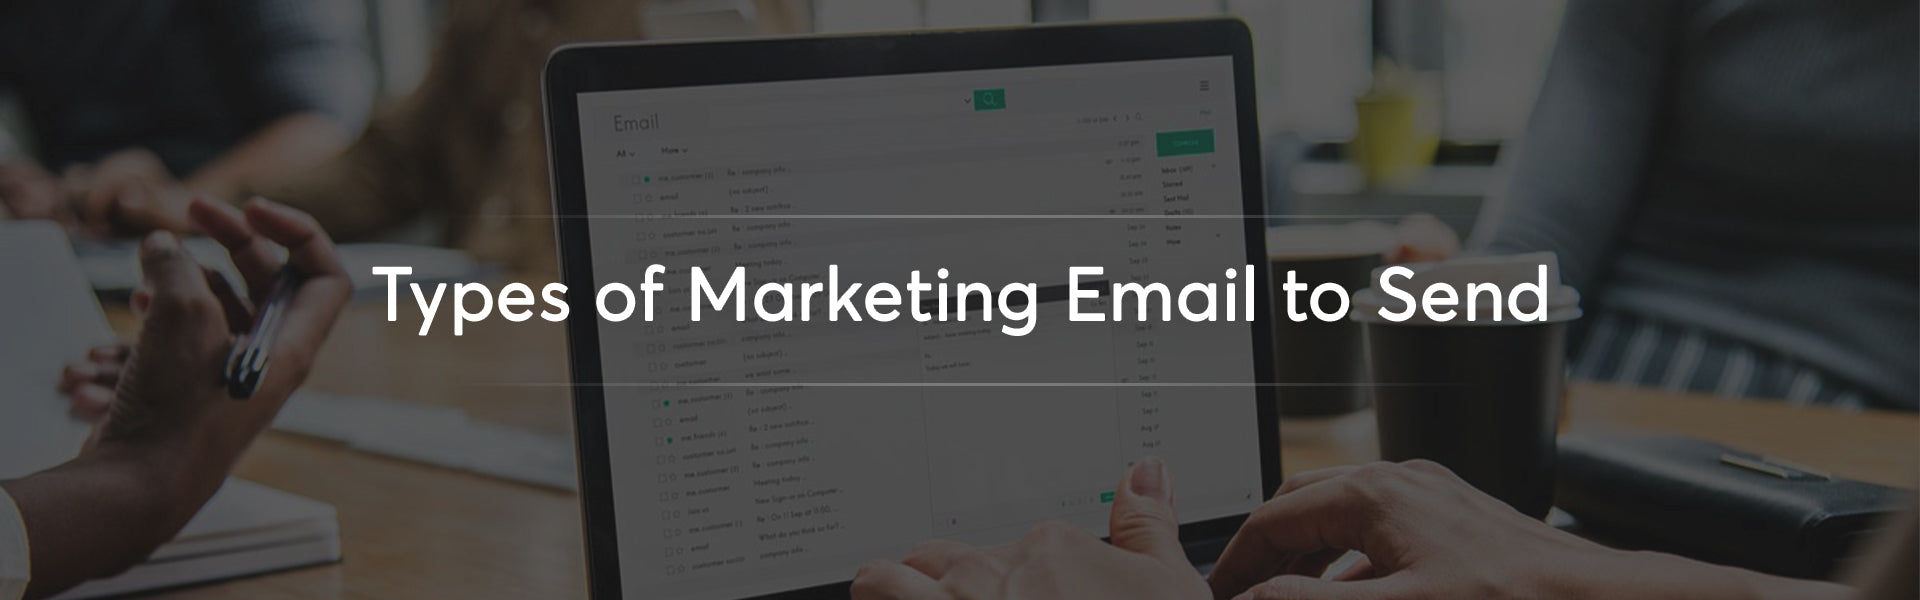 Types of Marketing Email to Send